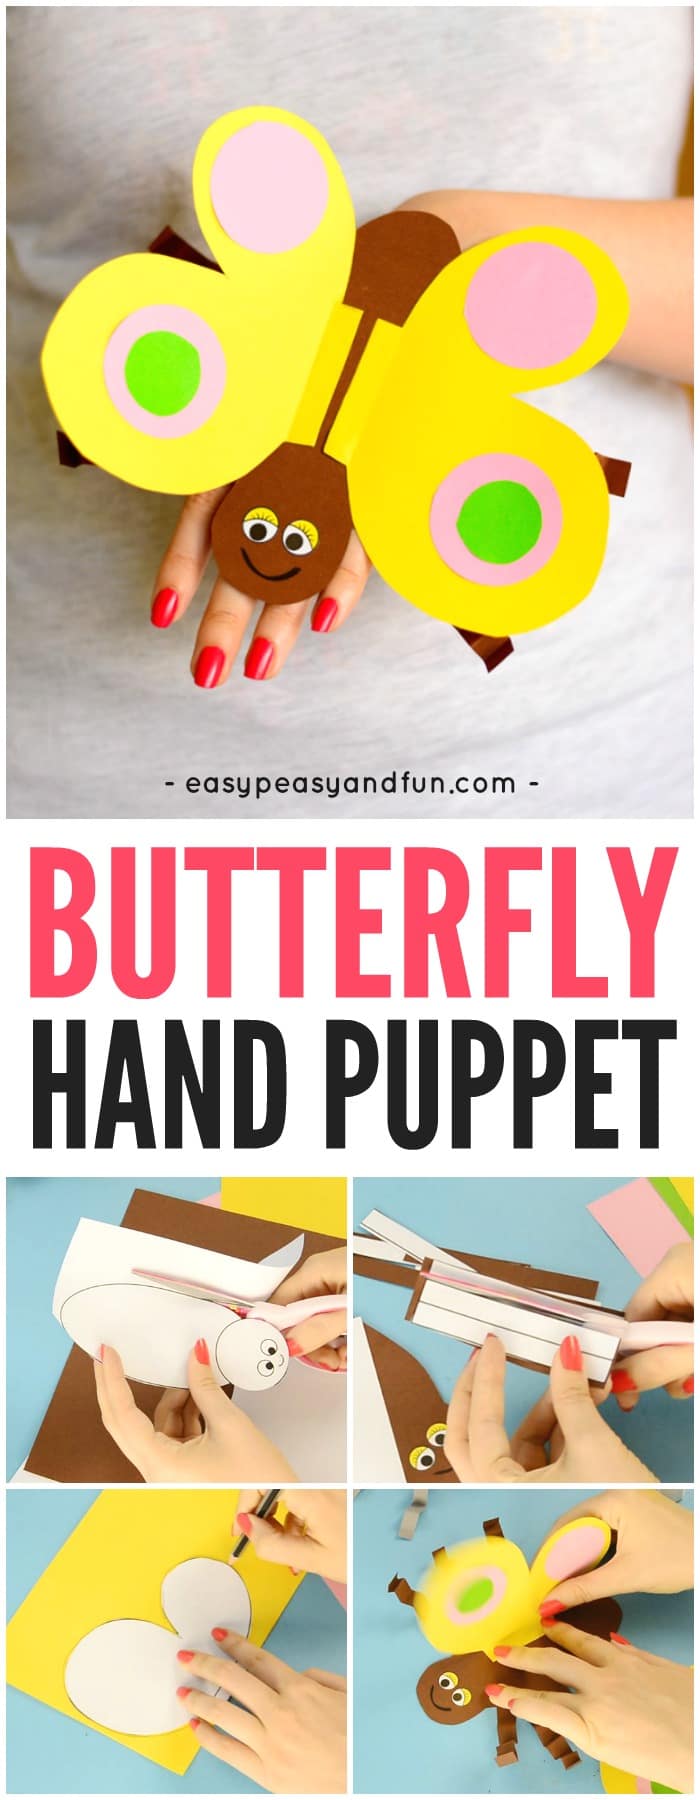 Printable Template Butterfly Paper Hand Puppet - Fun Crafts for Kids